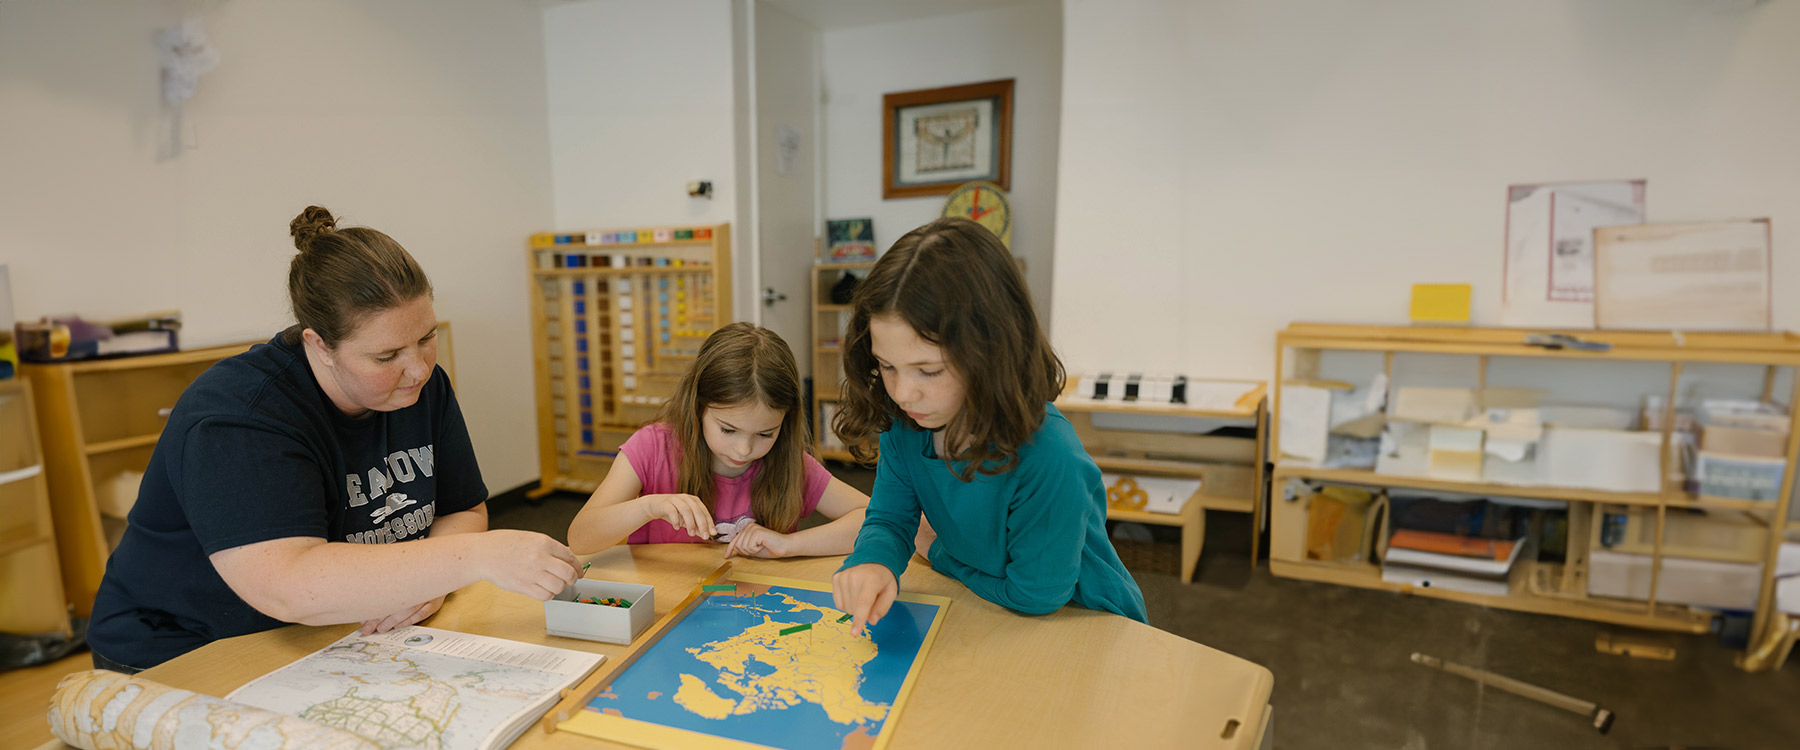 A teacher and two elementary students, seated at a table, work on a world map puzzle in a classroom.